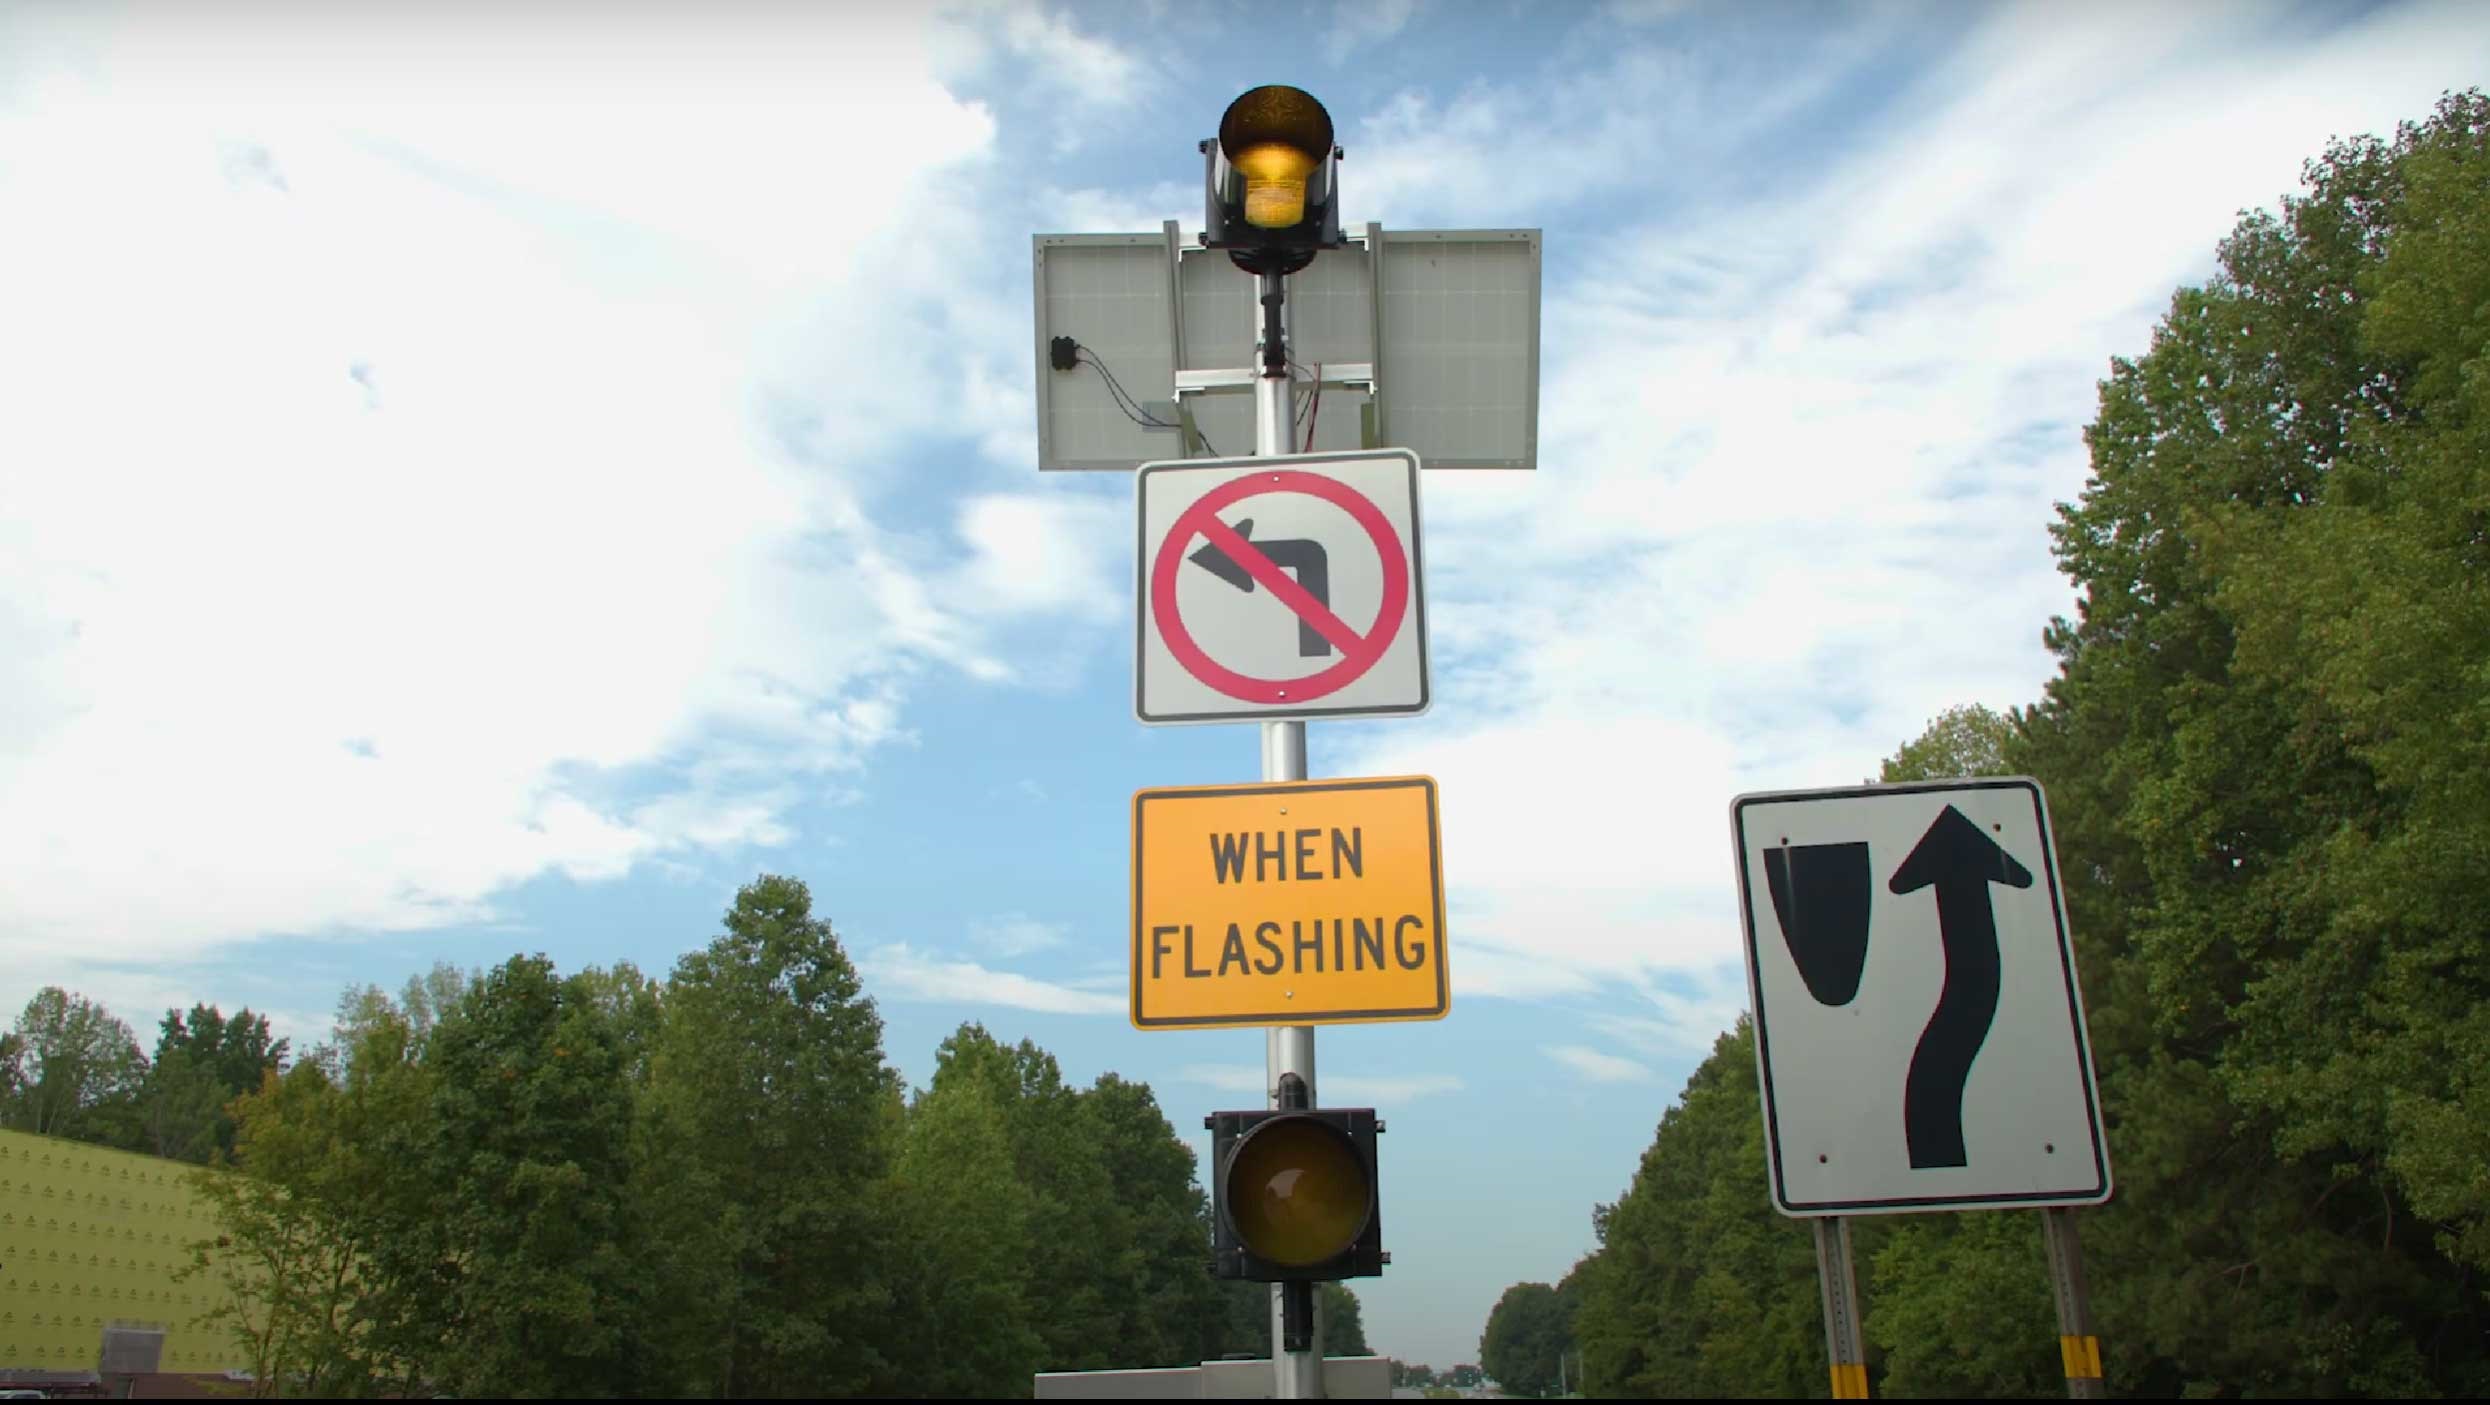 Road safety left turn right turn connected vehicles (image: Wavetronix)